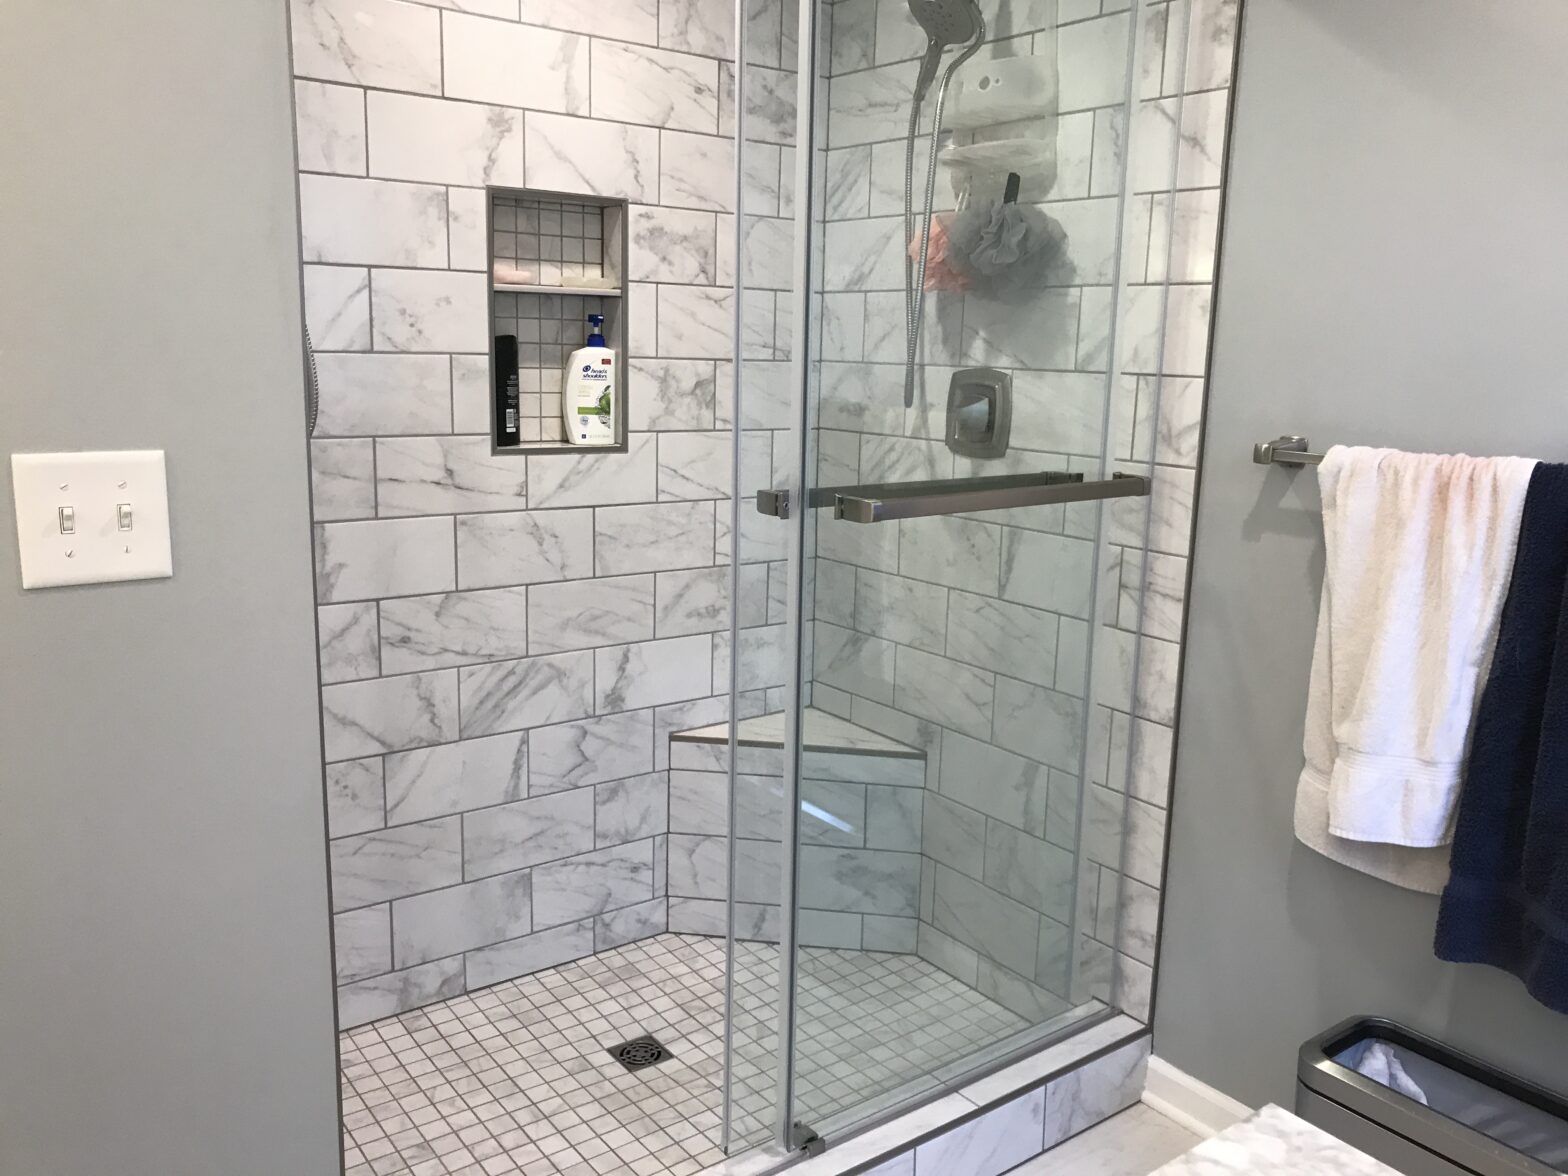 Bathroom Remodel Project Completed